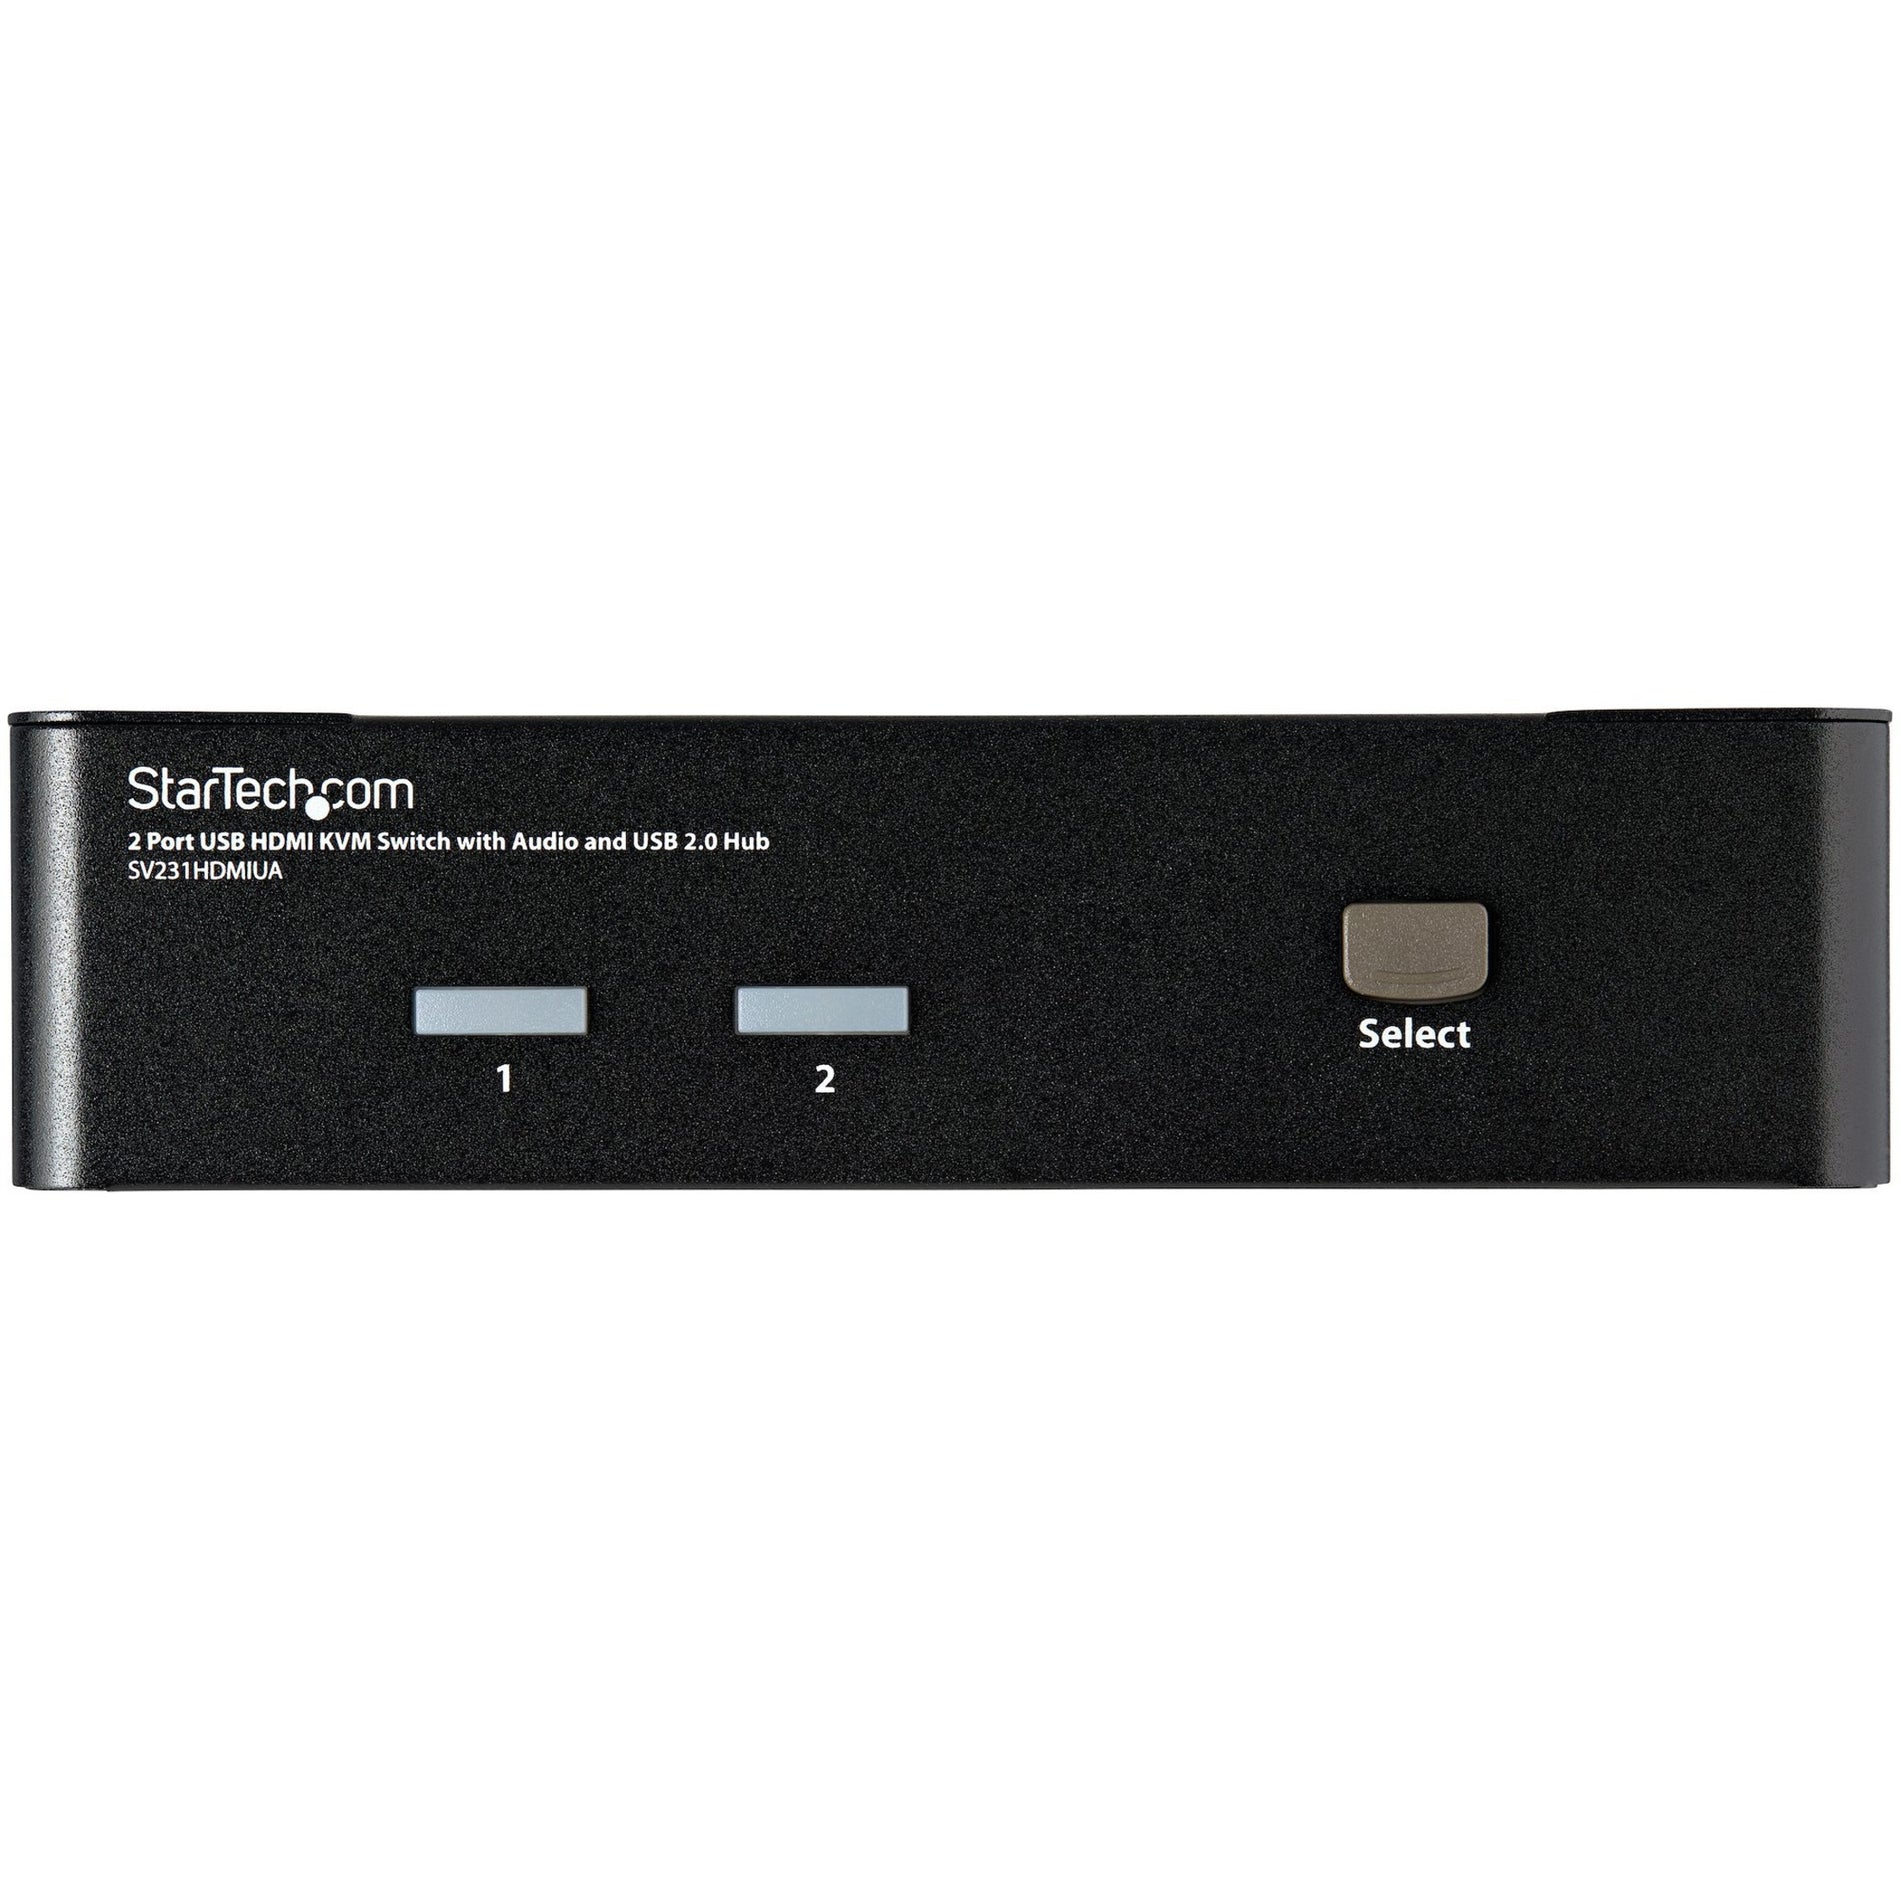 StarTech.com SV231HDMIUA 2-Port USB HDMI KVM Switch with Audio and USB 2.0 Hub Share Peripherals and Display Between Game Console and PC.